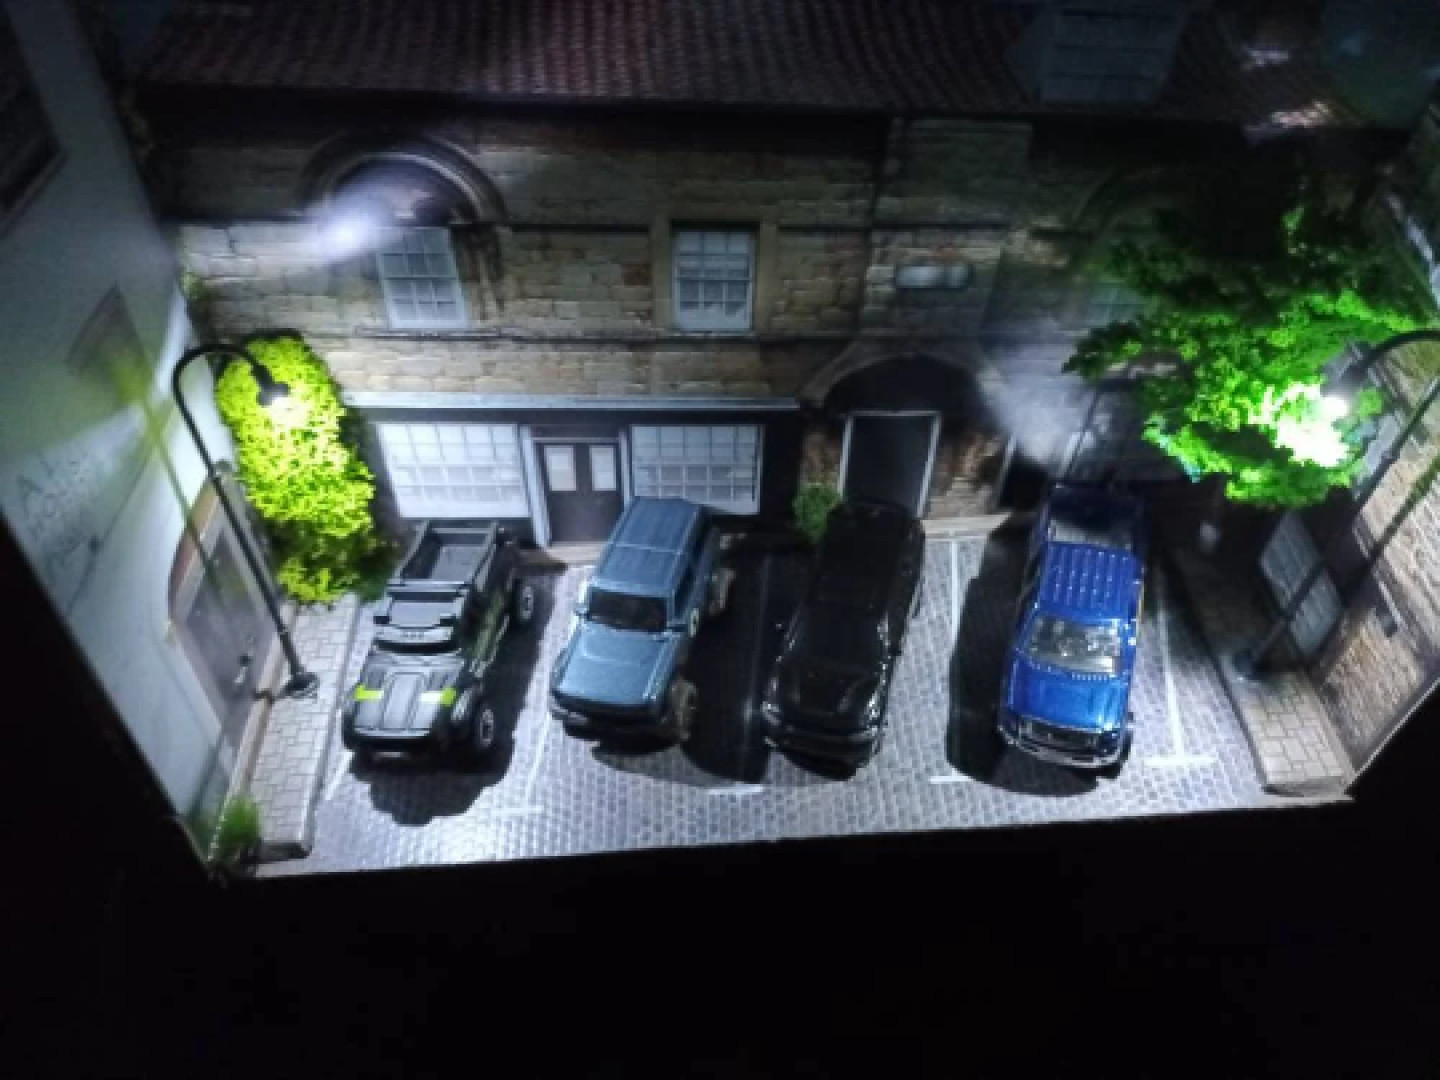 "Dioramia Street". 1:64 scale 3D diorama for car models collector.